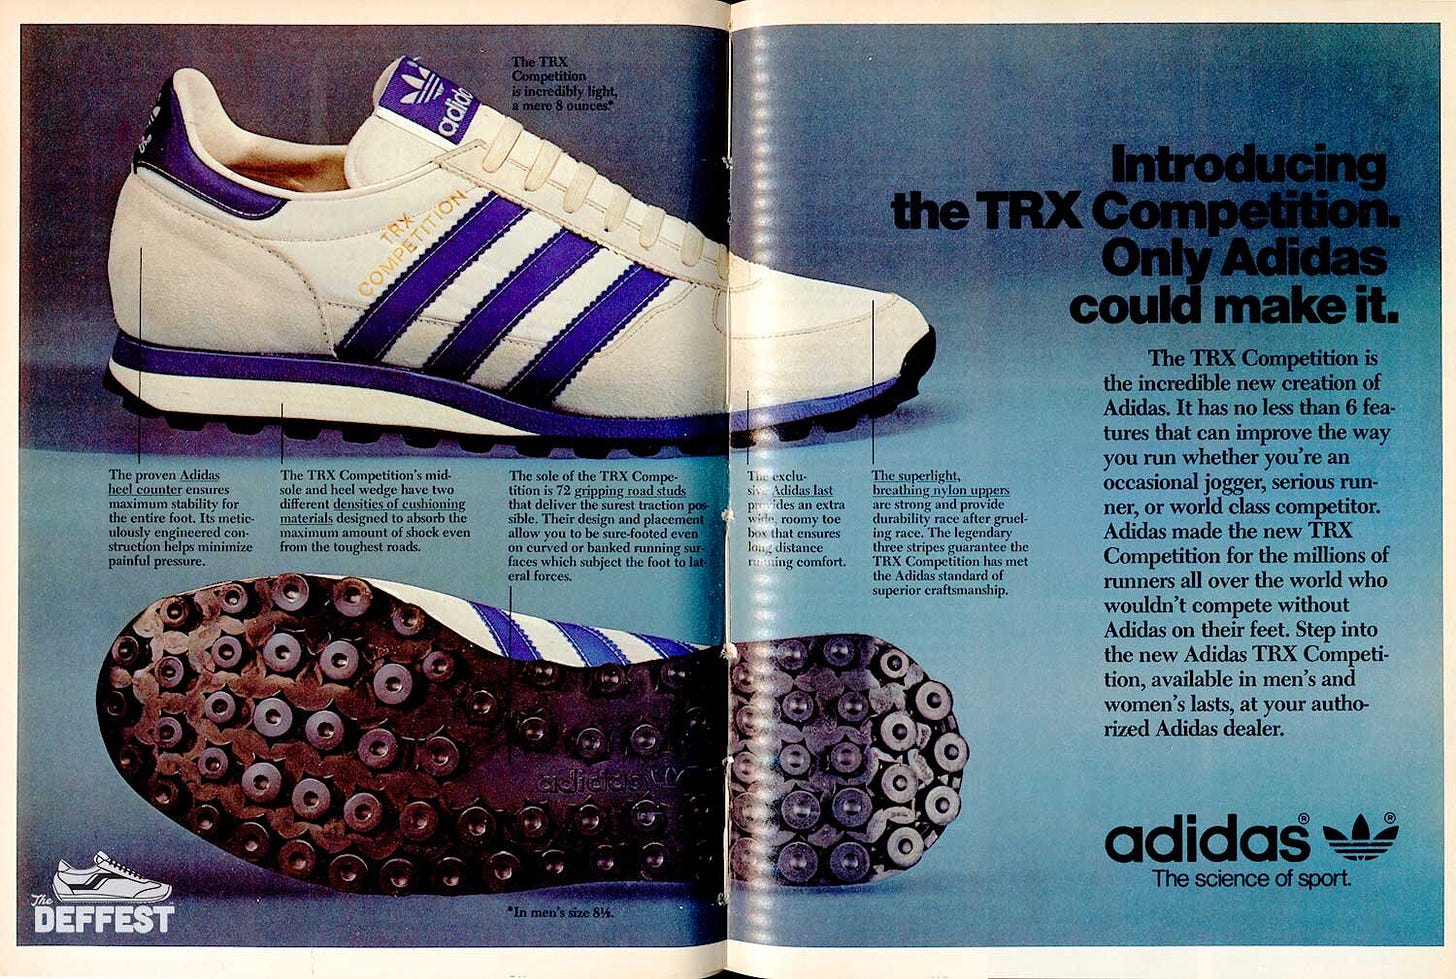 adidas 1979 TRX Competition vintage sneaker ad @ The Deffest